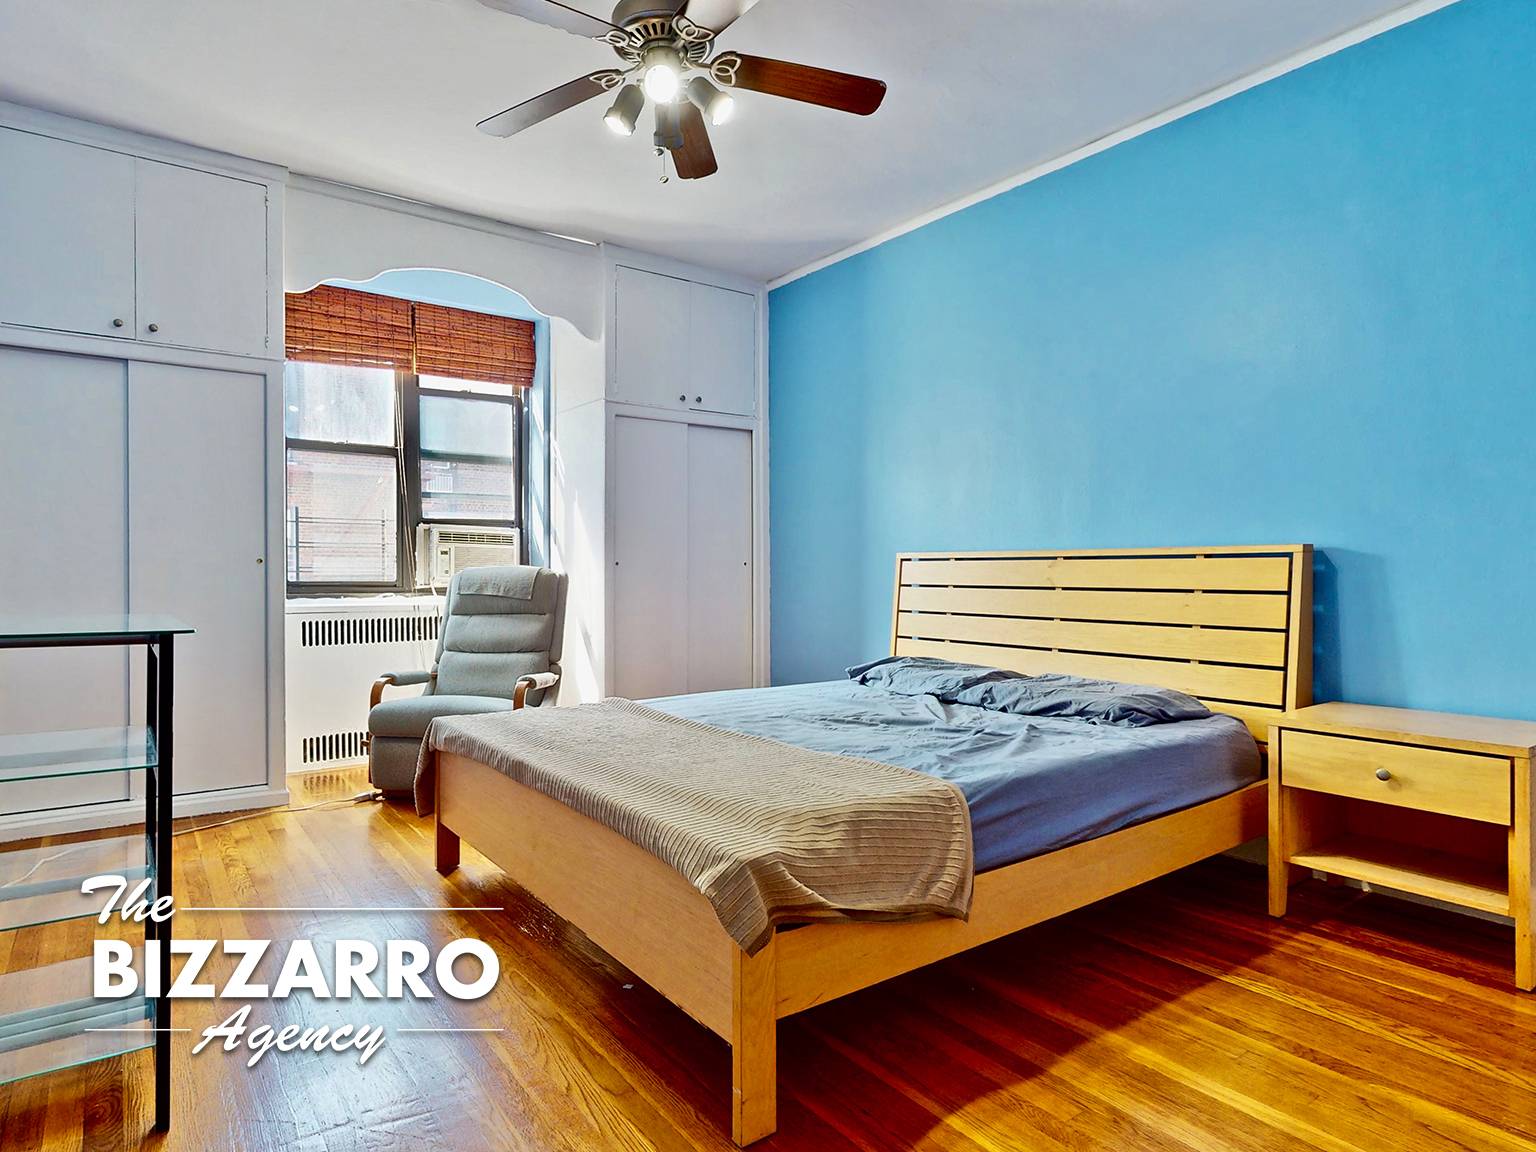 Welcome to this massive sun soaked 2BR with sunken living room and art deco charm.